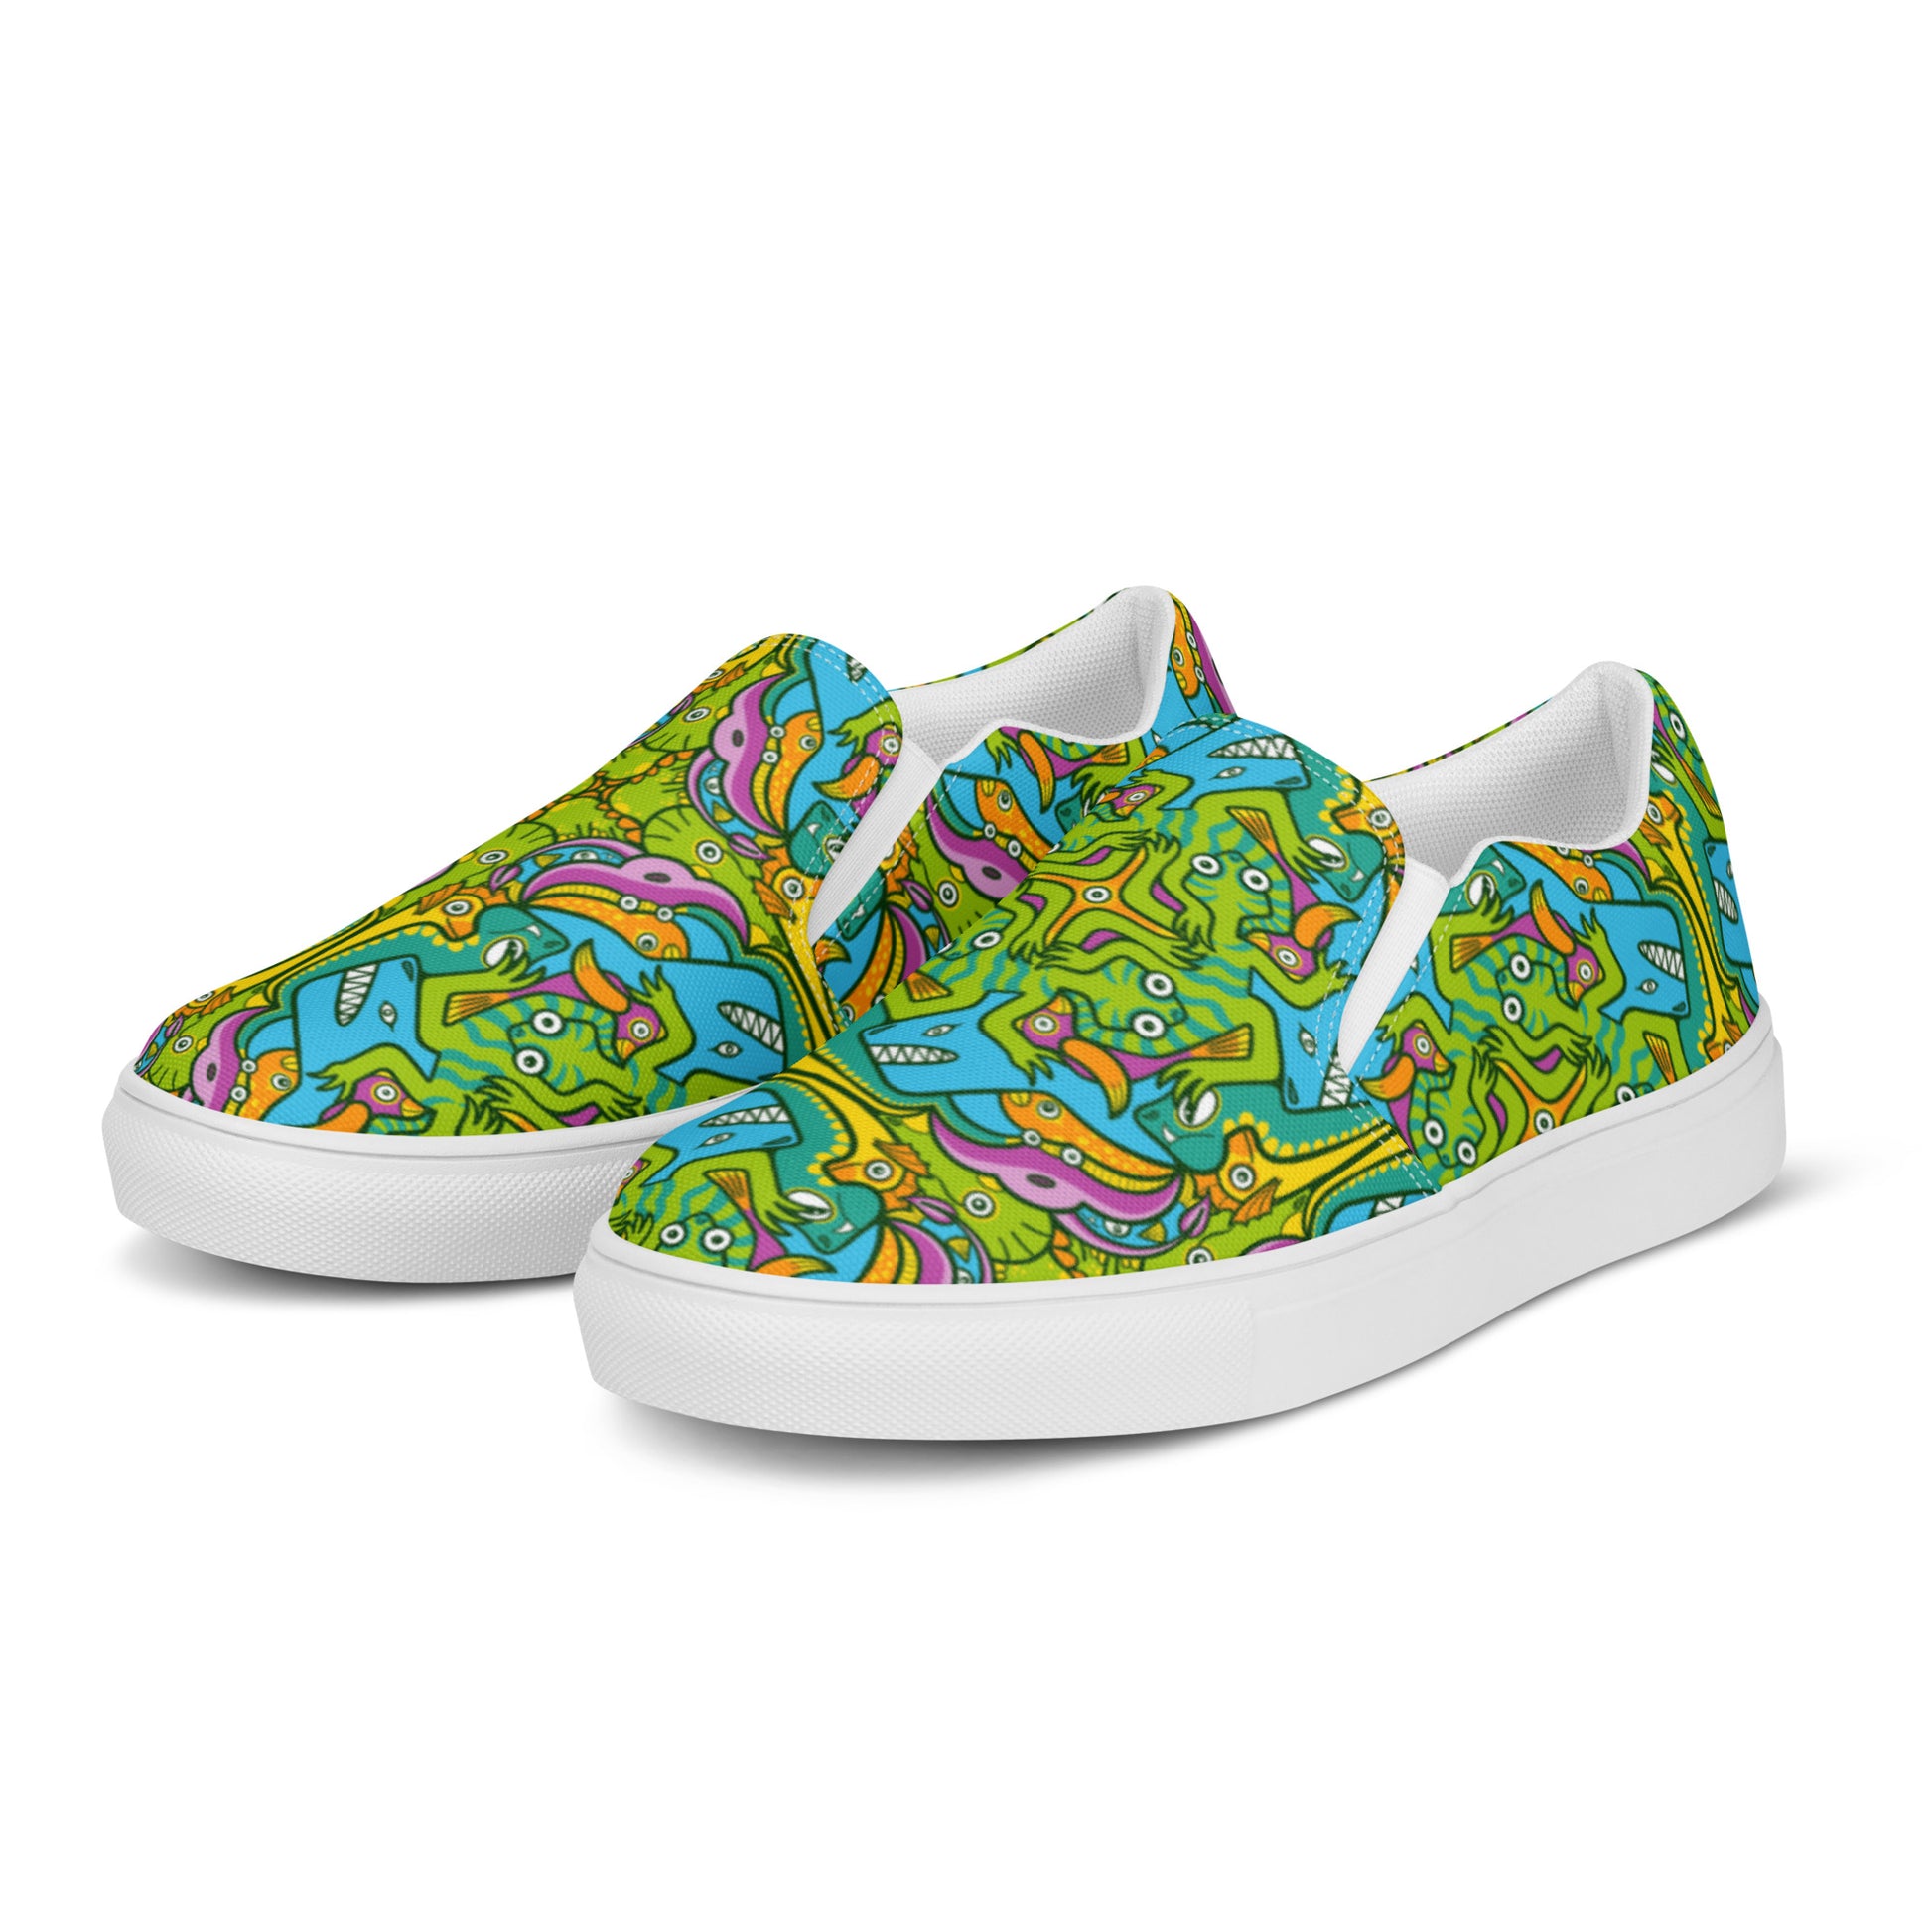 To keep calm and doodle is more than just doodling Men’s slip-on canvas shoes. Overview